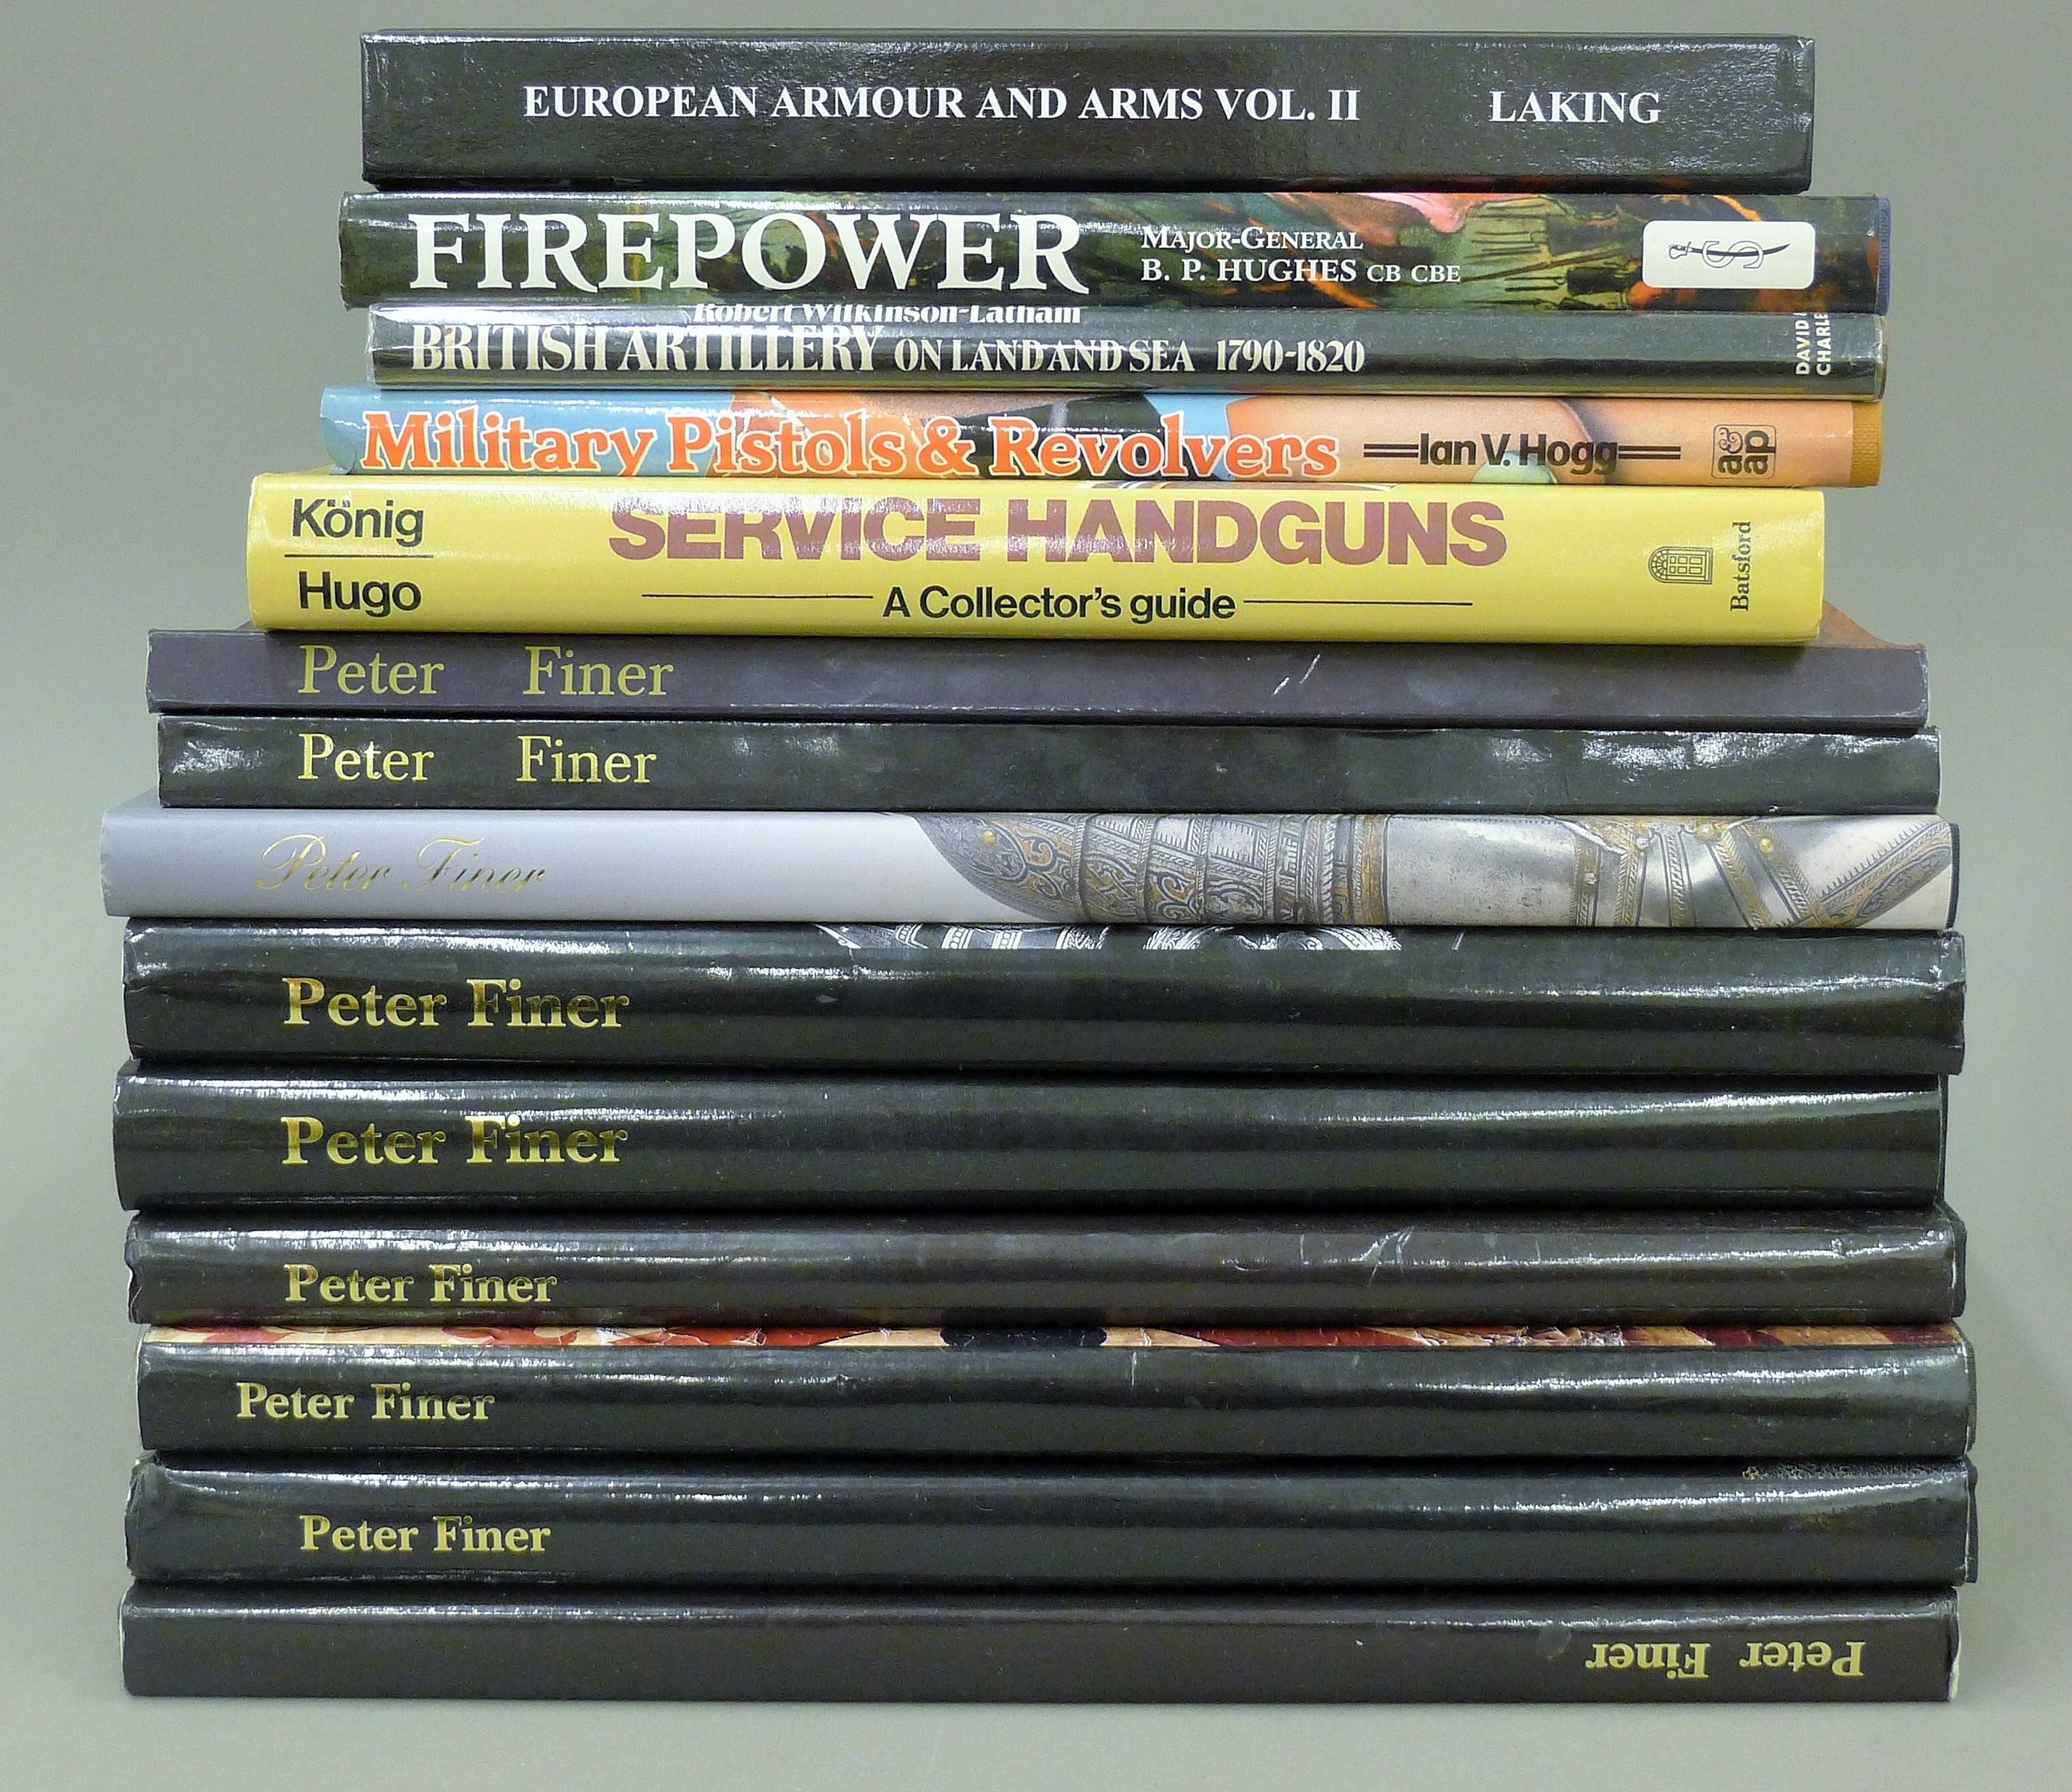 Nine Arms and Armour catalogues by Peter Finer, together with other arms books.